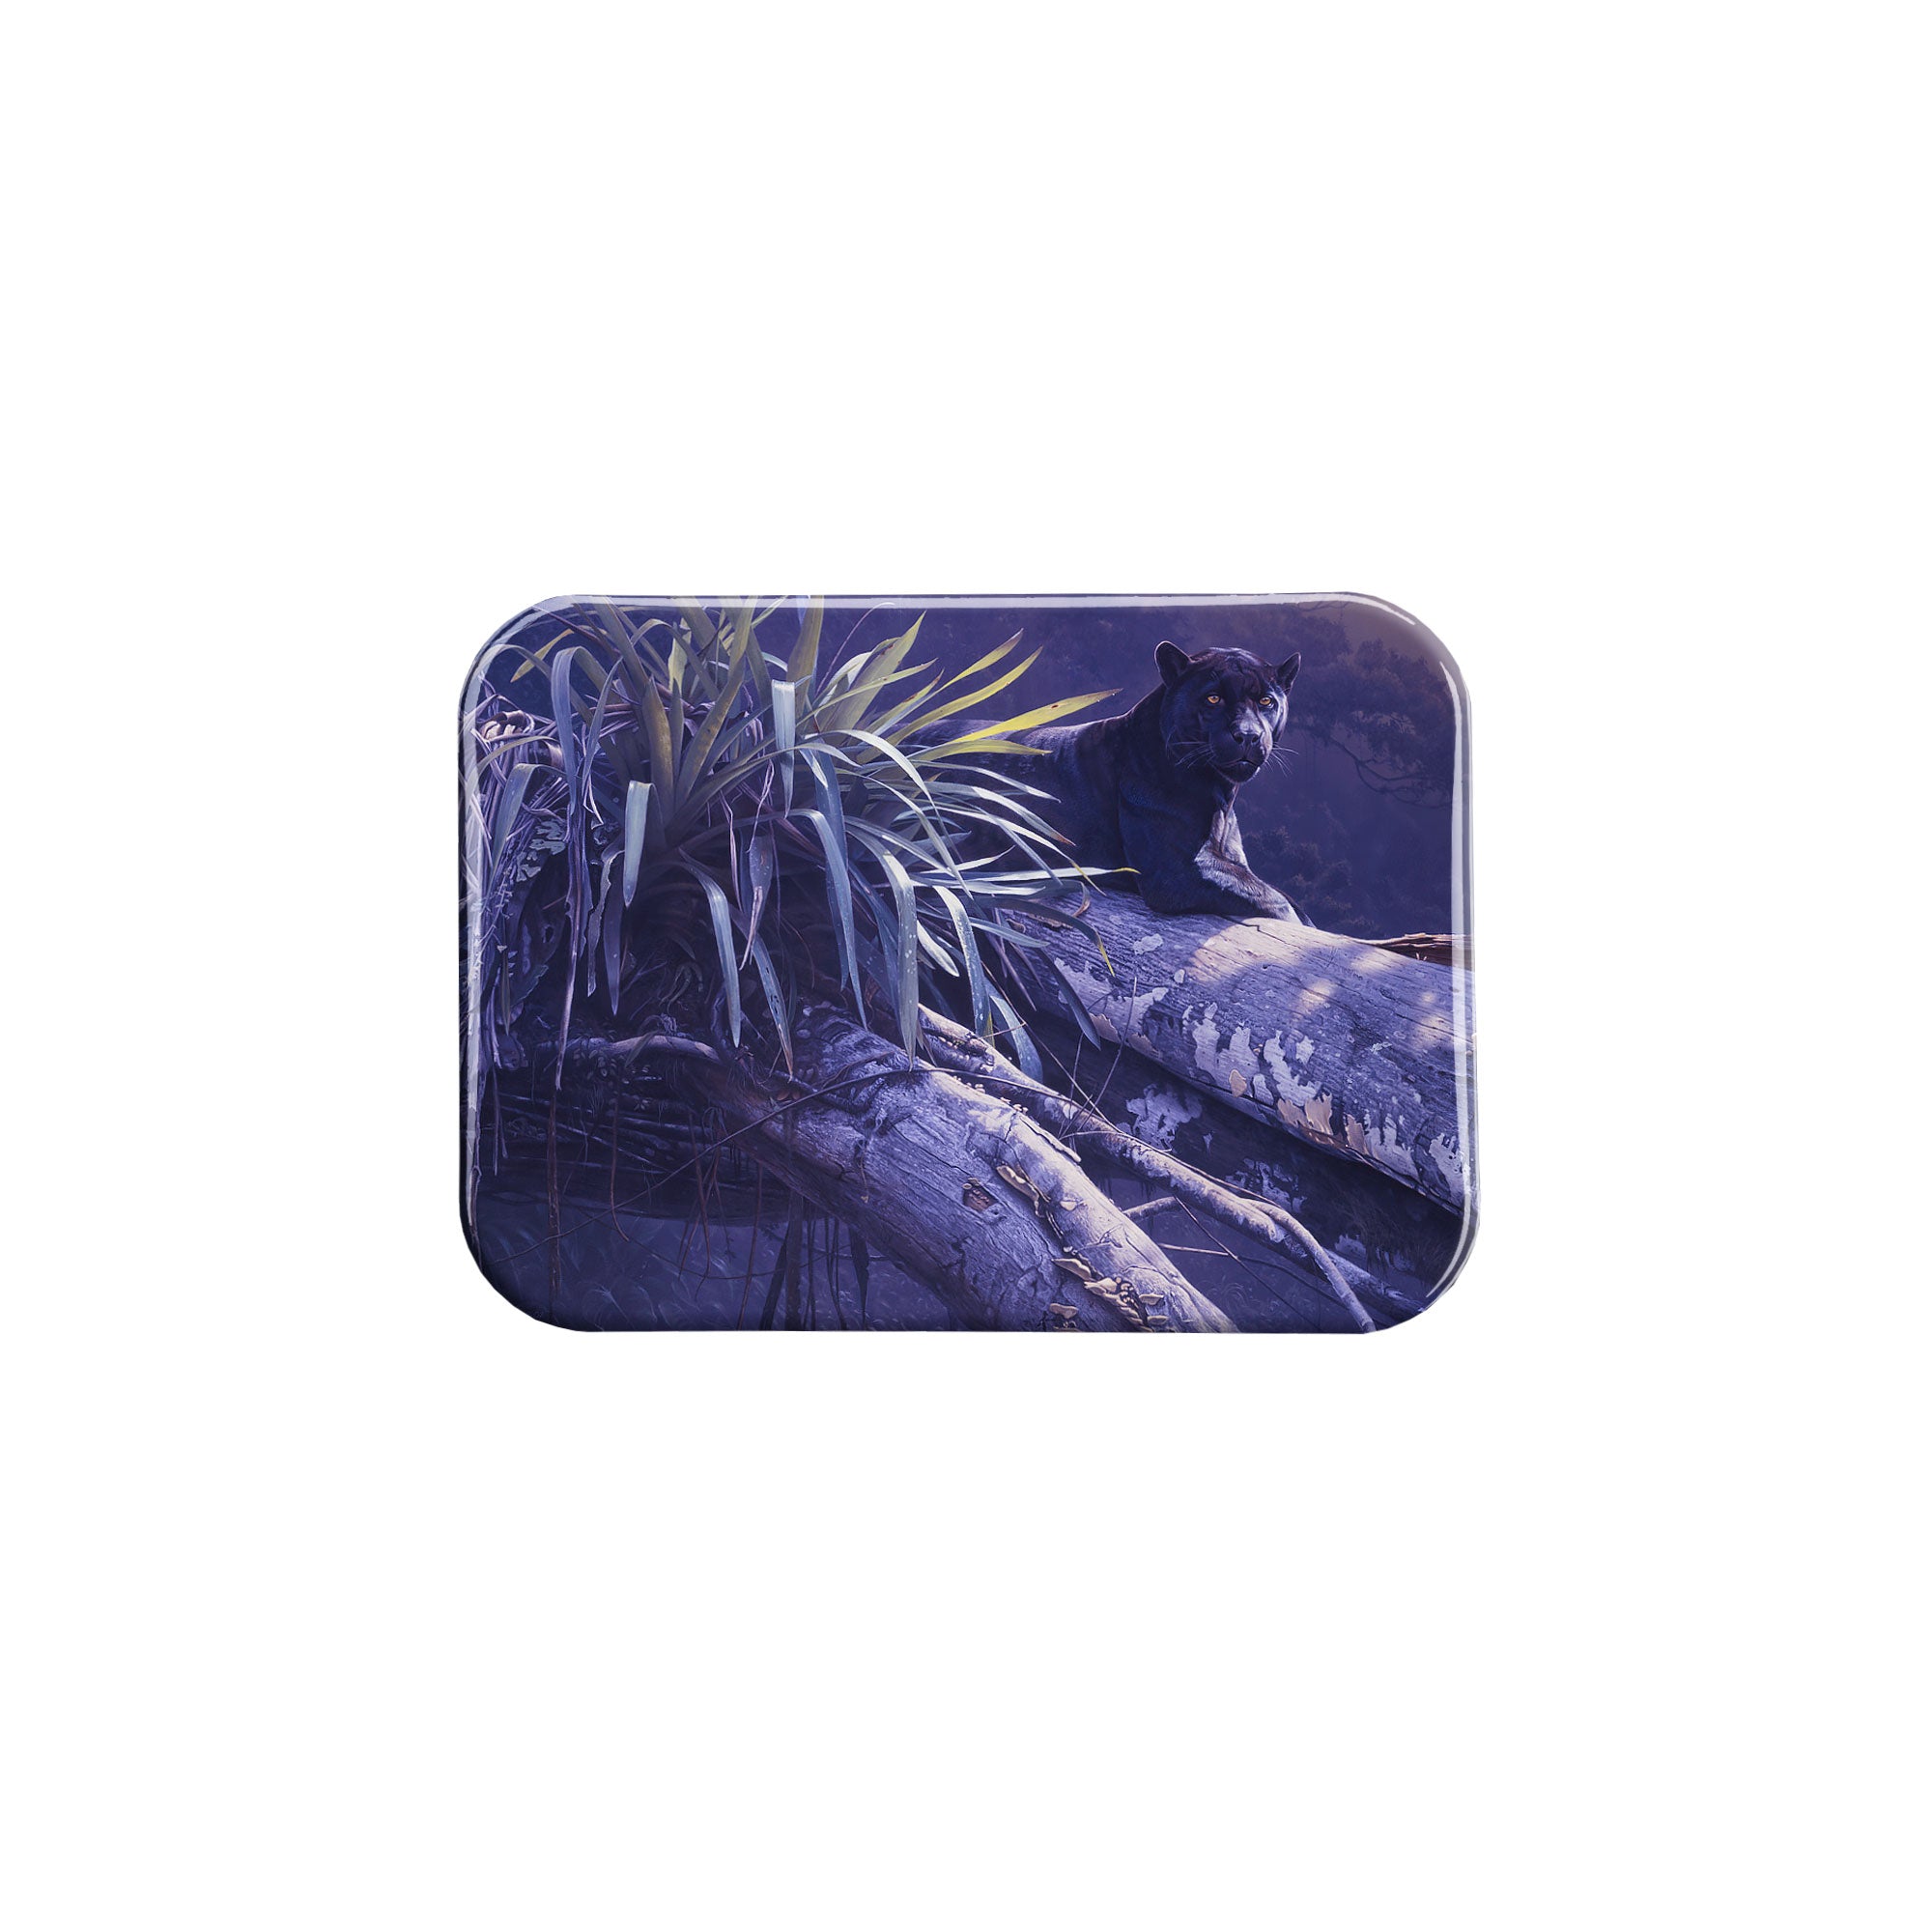 "Apparition of the Amazon" - 2.5" X 3.5" Rectangle Fridge Magnets